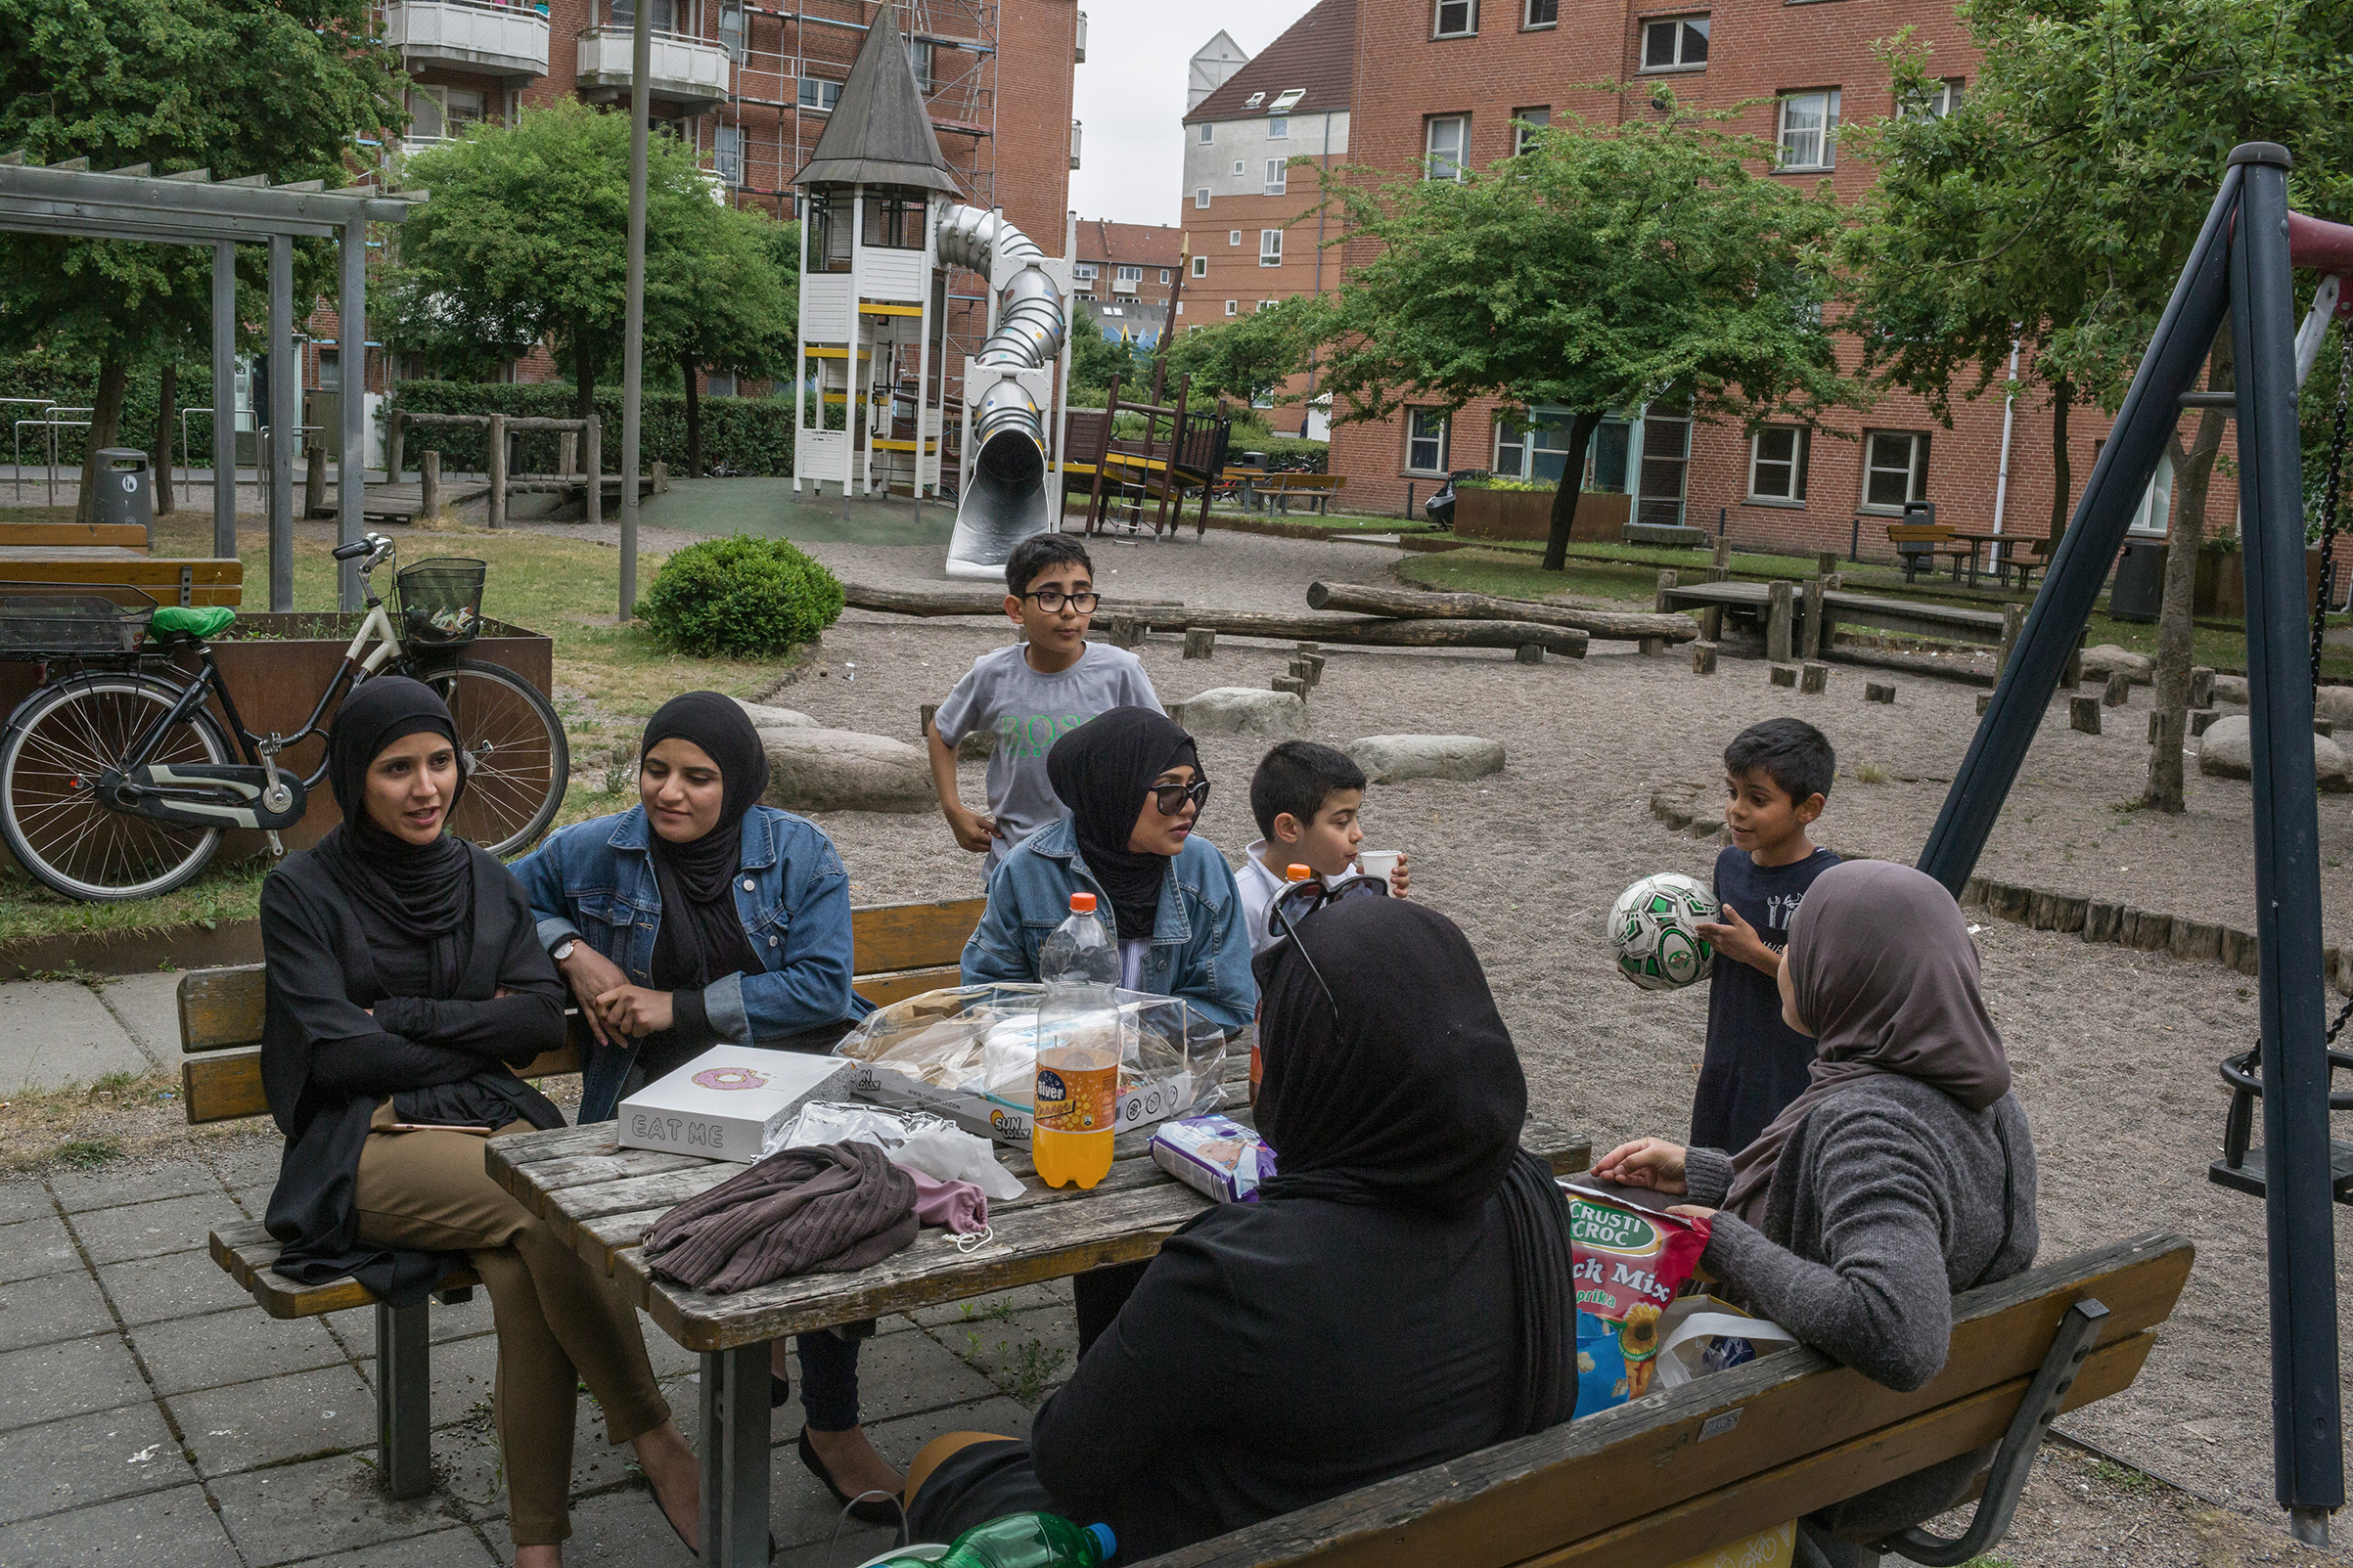 Mjolnerparken, a housing project in Copenhagen, is classified as a “ghetto.” (Mauricio Lima—The New York Times/Redux)